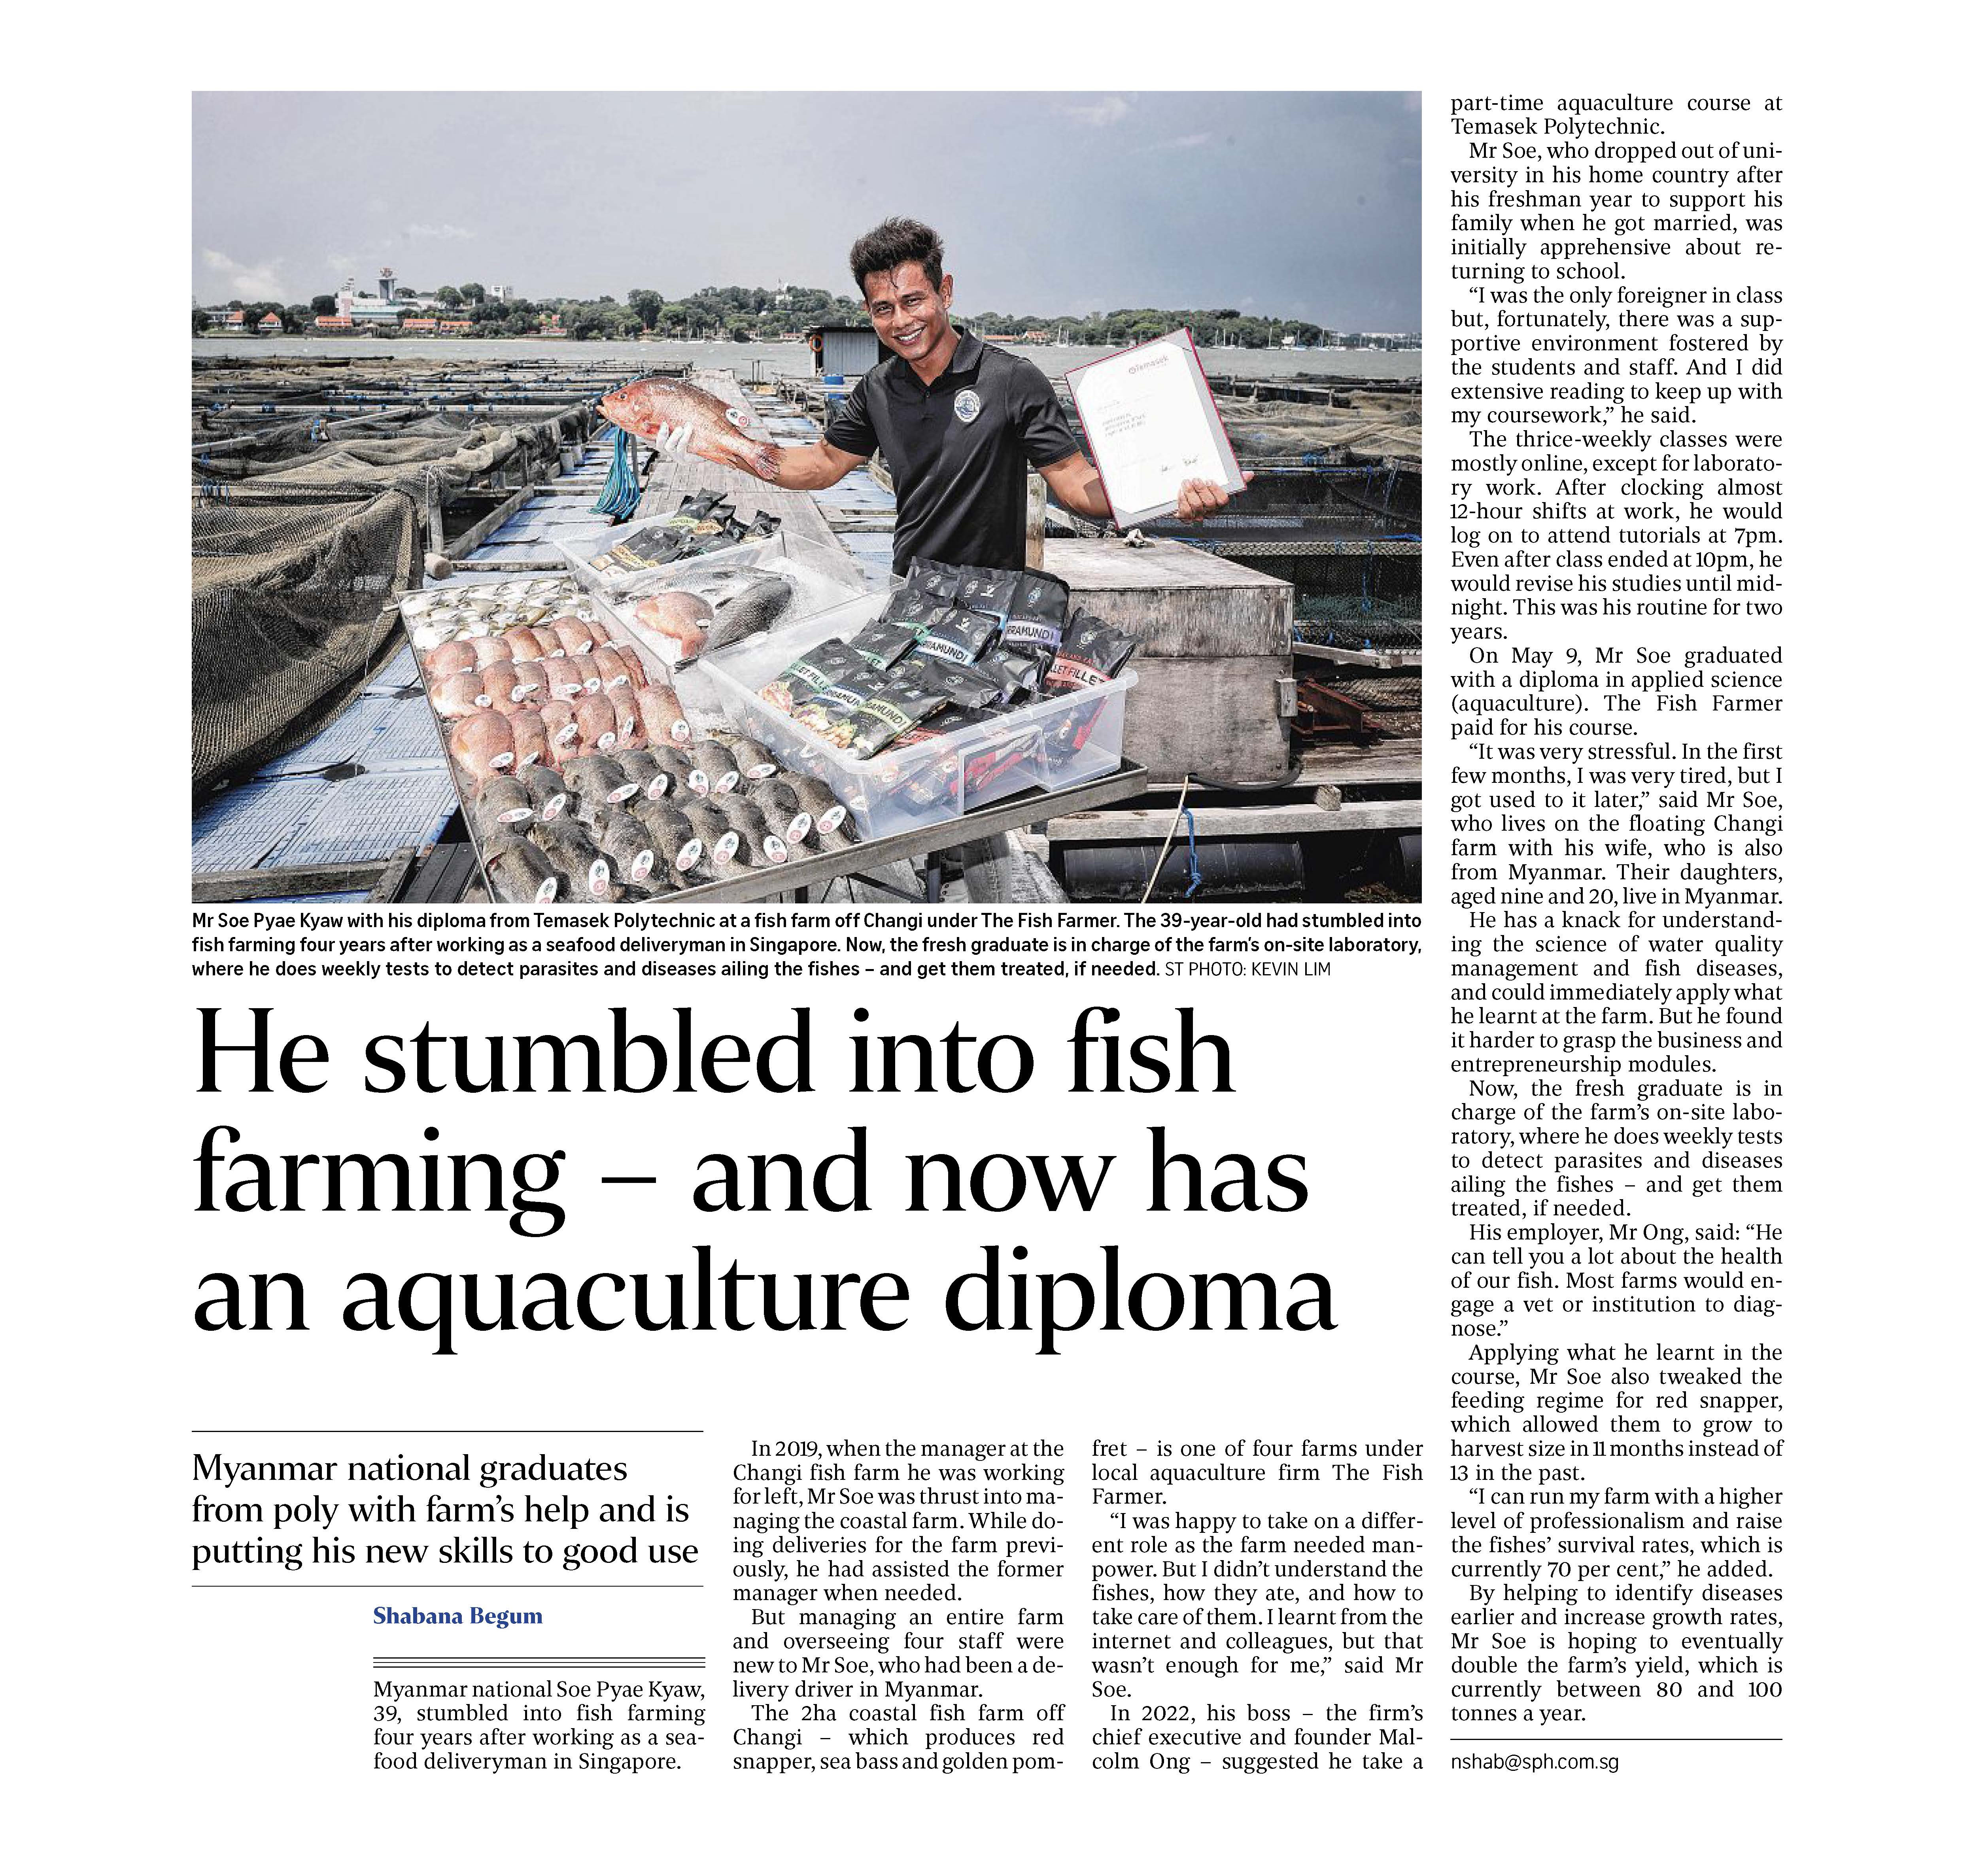 He stumbled into fish farming – and now has an aquaculture diploma